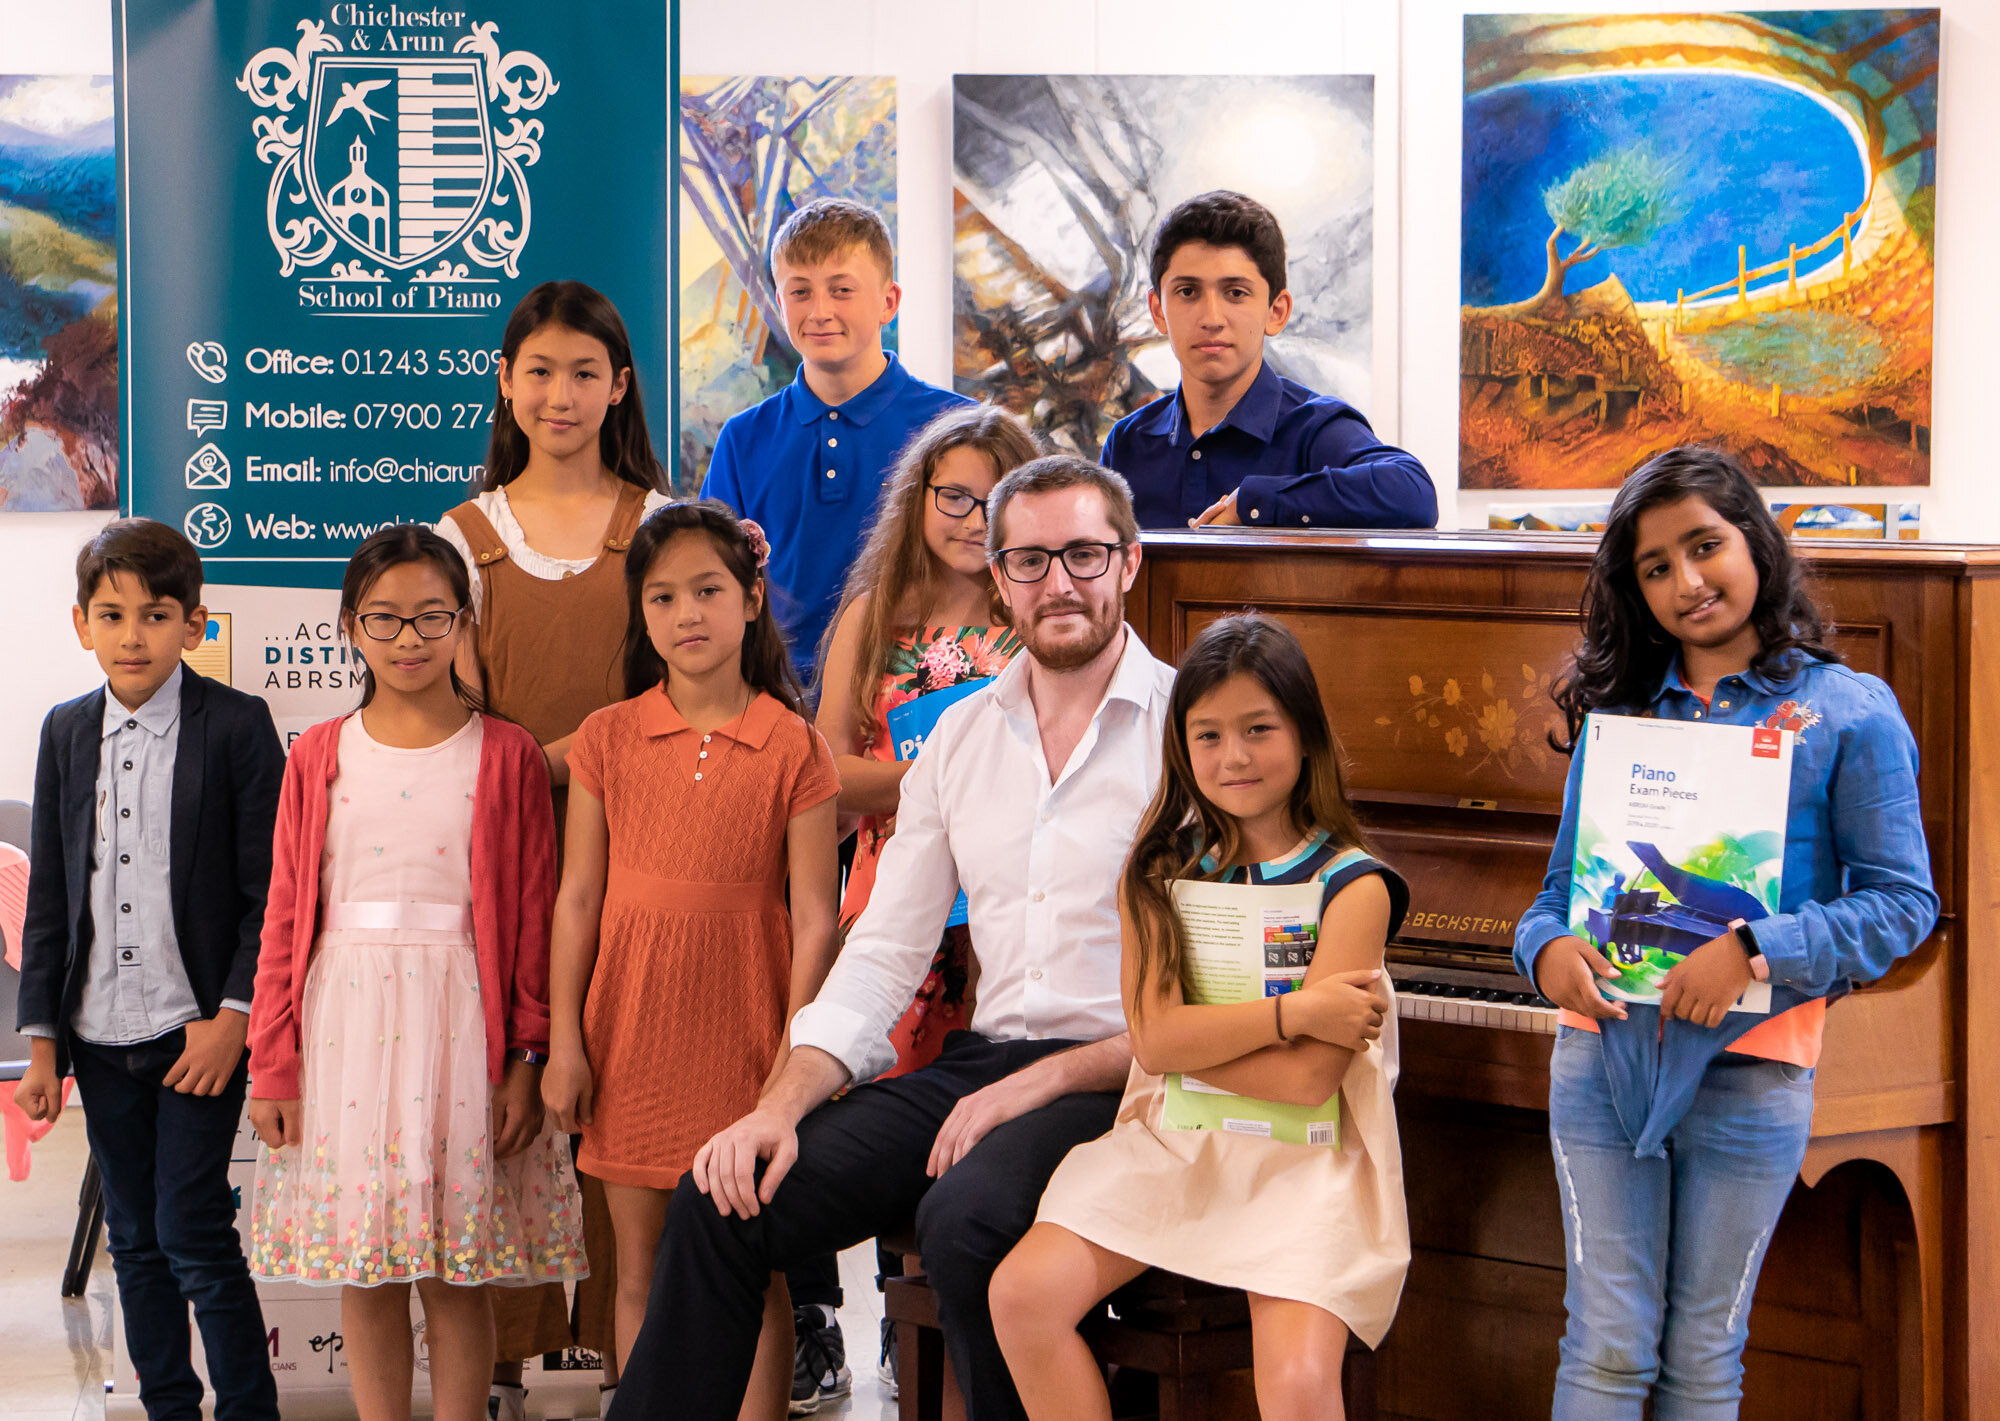   Welcome to Chichester &amp; Arun School of Piano   “Chris is an amazing teacher and pianist. He makes the lessons fun and interesting in a relaxed atmosphere. I would highly recommend him.”   - Claire, parent  